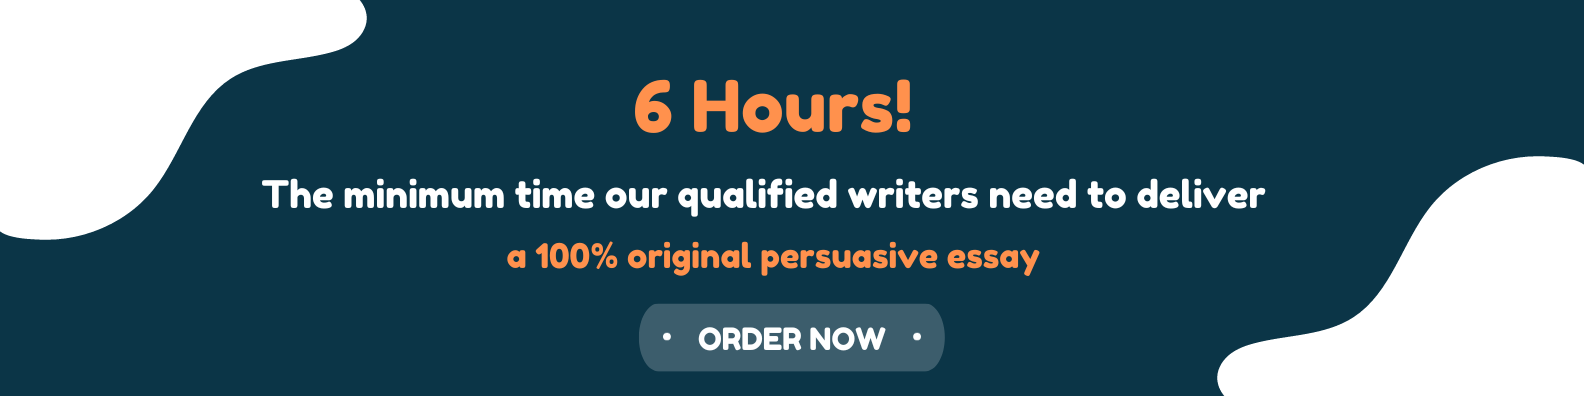 The minimum time the writer will need to deliver a high quality persuasive essay